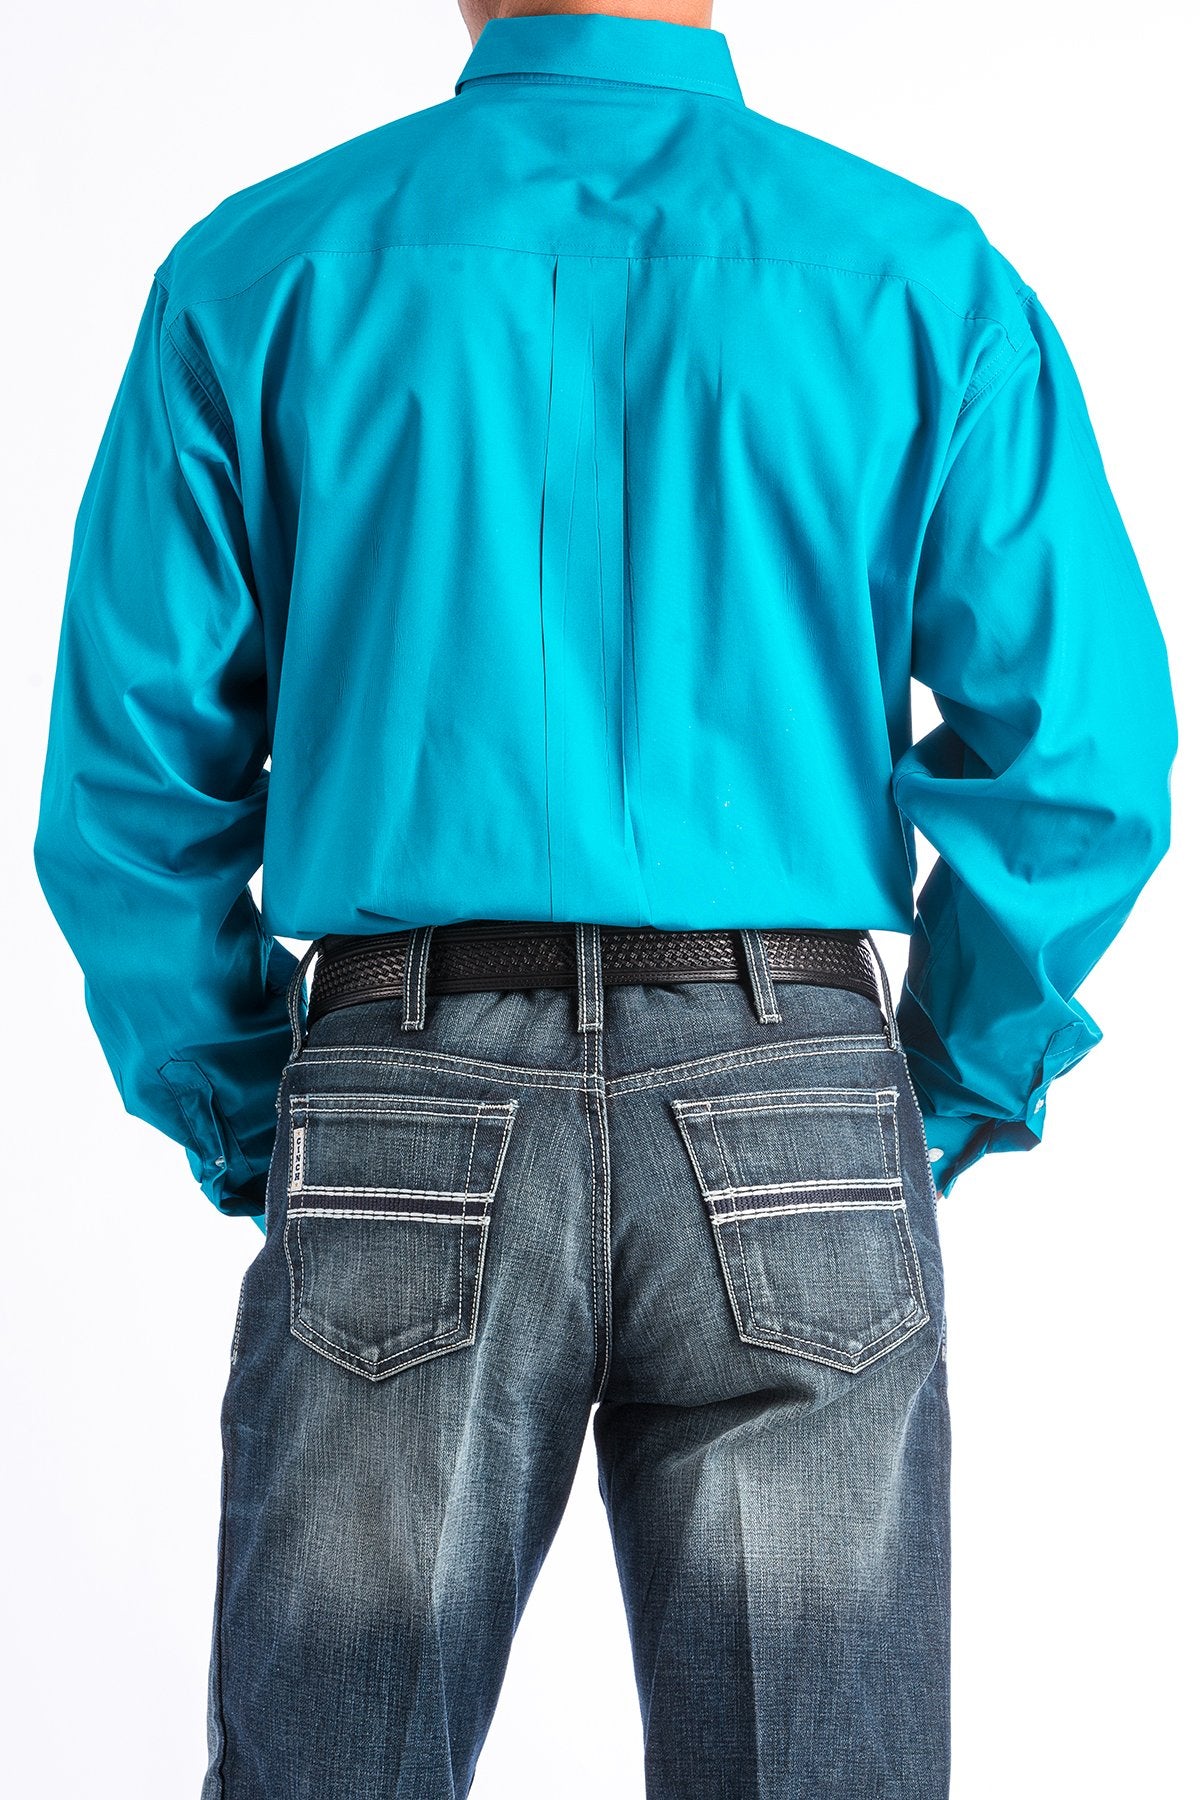 Cinch Solid Turquoise L/S Shirt- MTW1103800